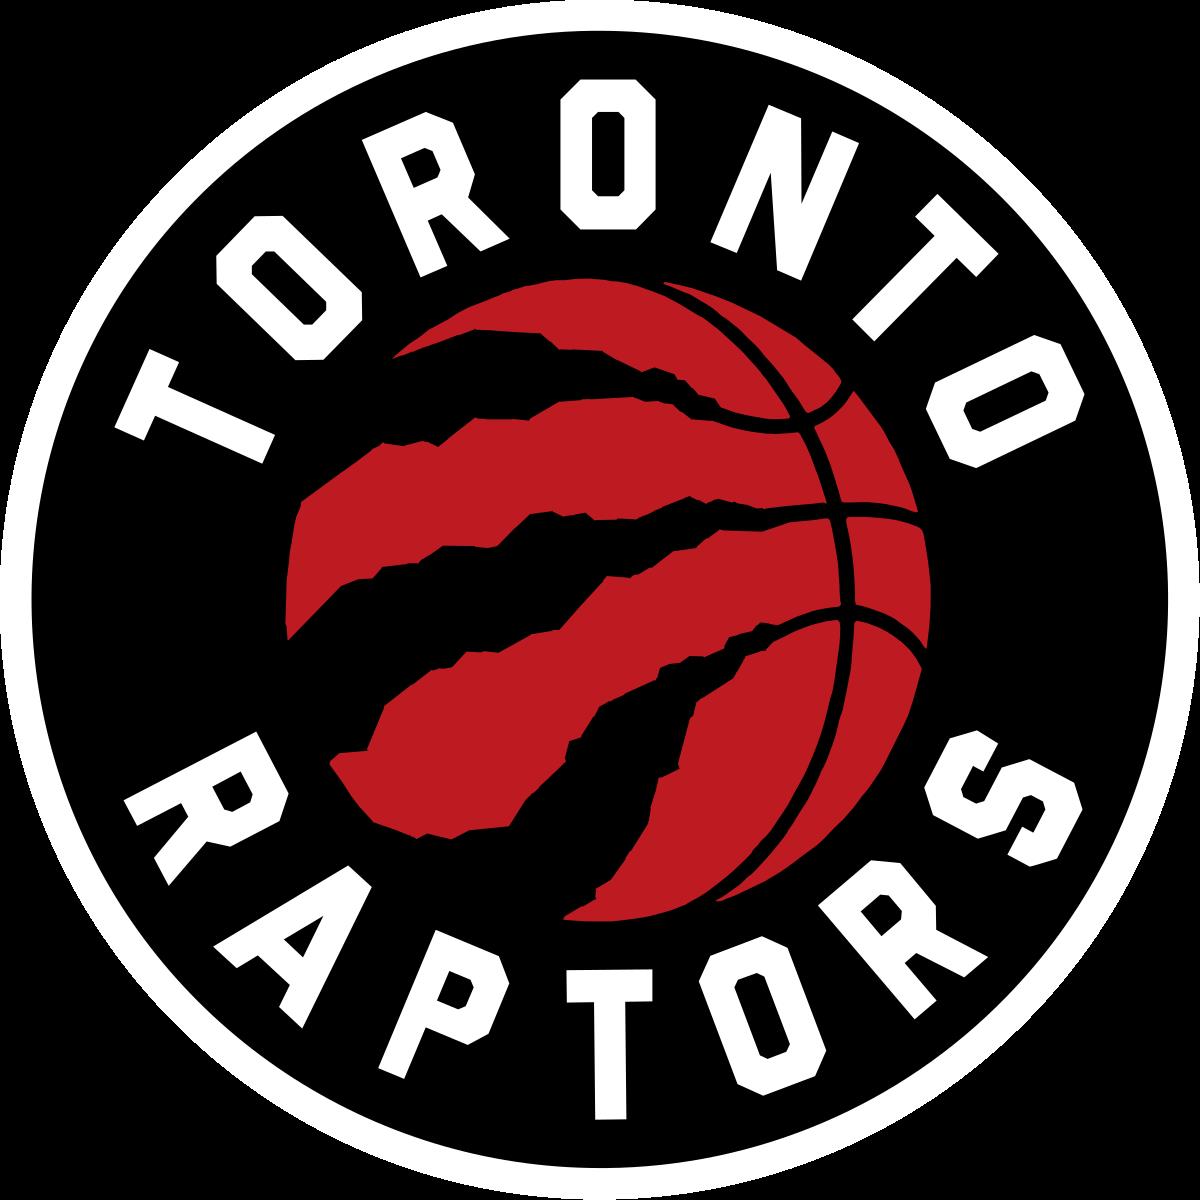 What the Toronto Raptors need in their new head coach